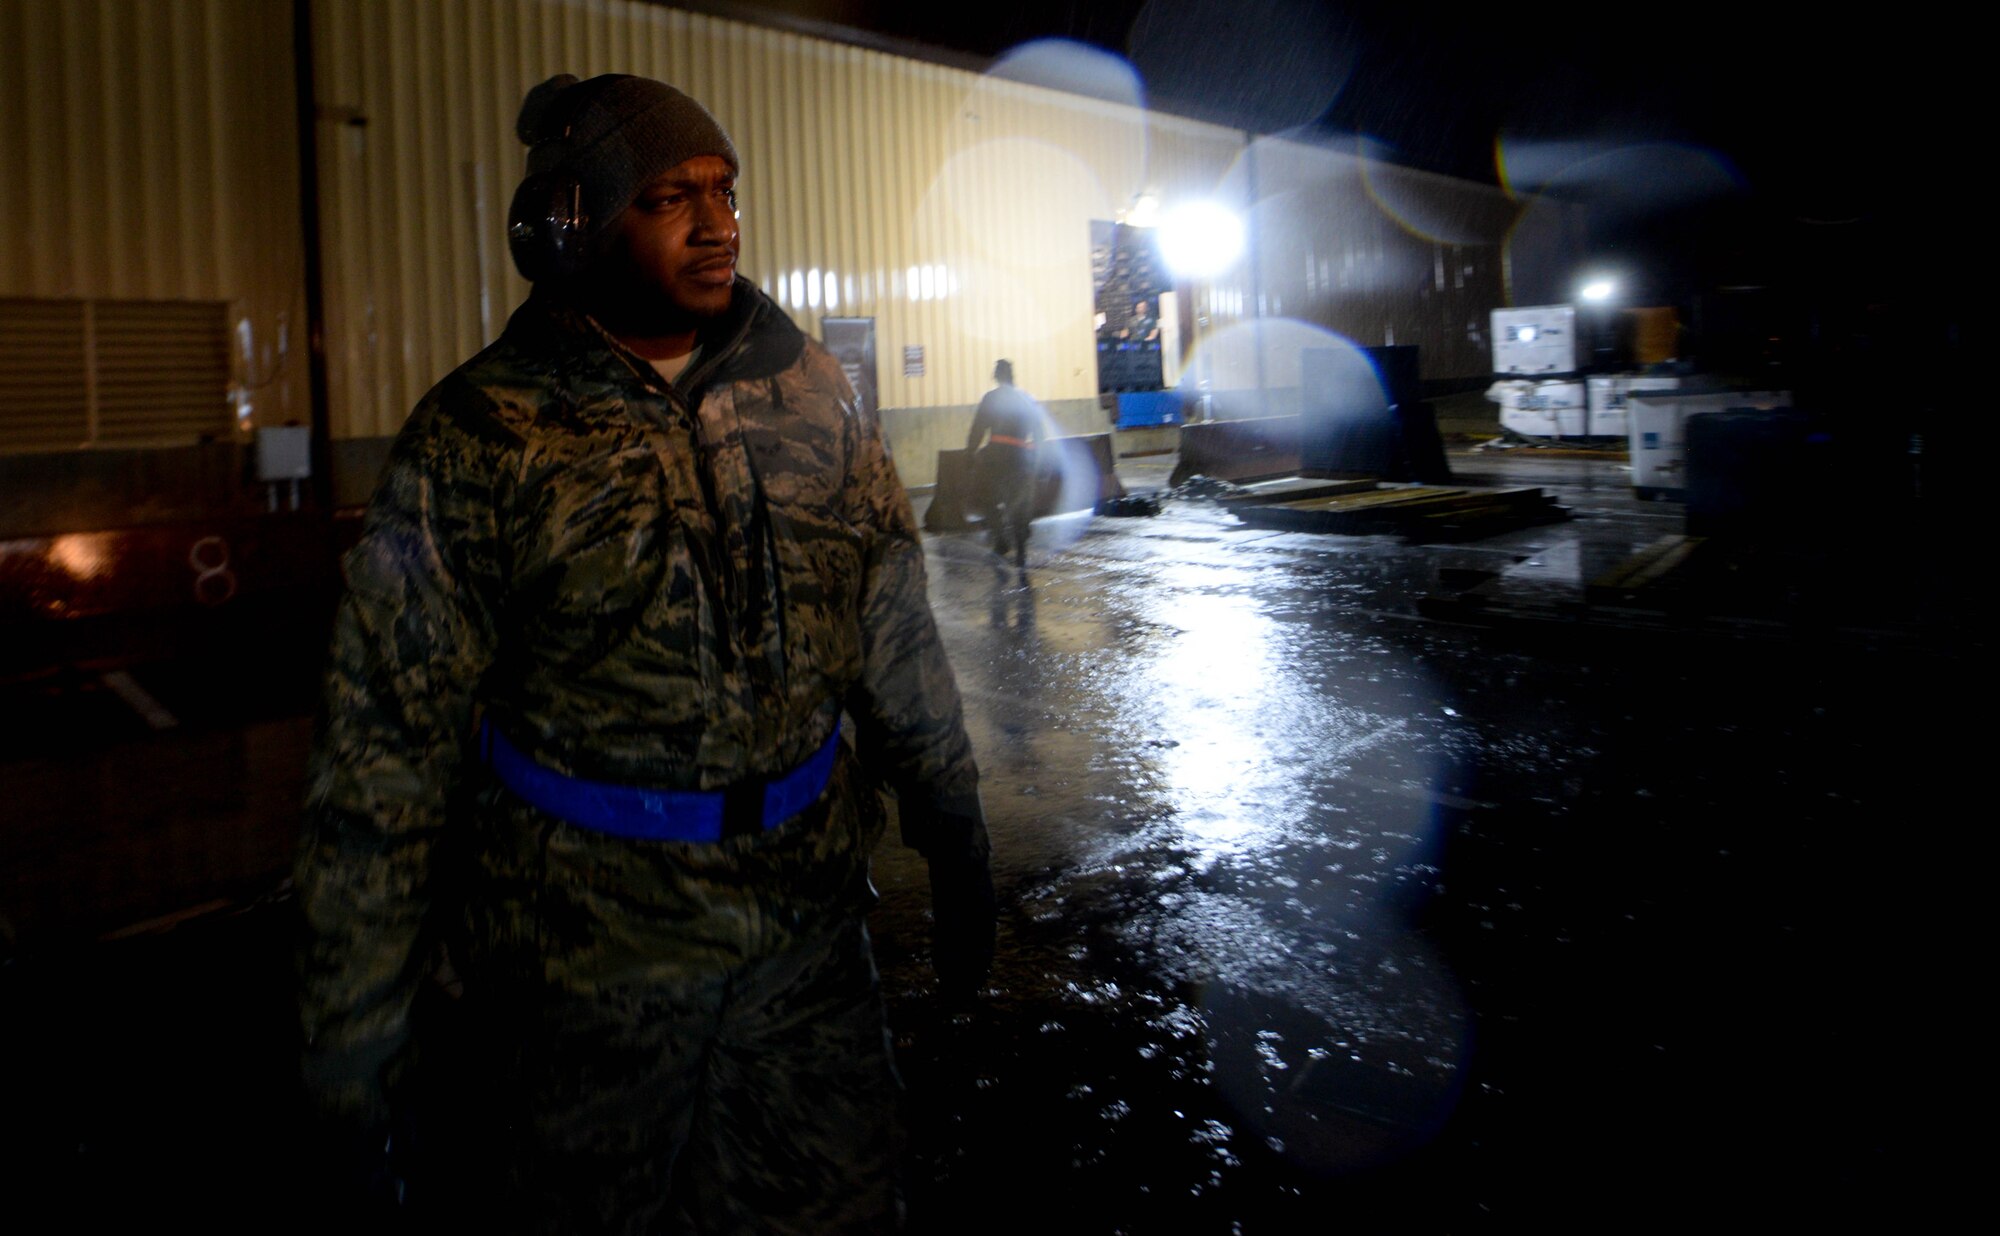 Airman 1st Class Andrew Winters, 375th Logistics Readiness Squadron air transportation specialist, waits for a forklift to move pallets during a mobility exercise on Scott Air Force Base, Illinois, Jan. 23, 2019. Winters, with a team of two other Airmen, were tasked will palletizing personal and individual protective equipment gear from the Airmen participating in the exercise.